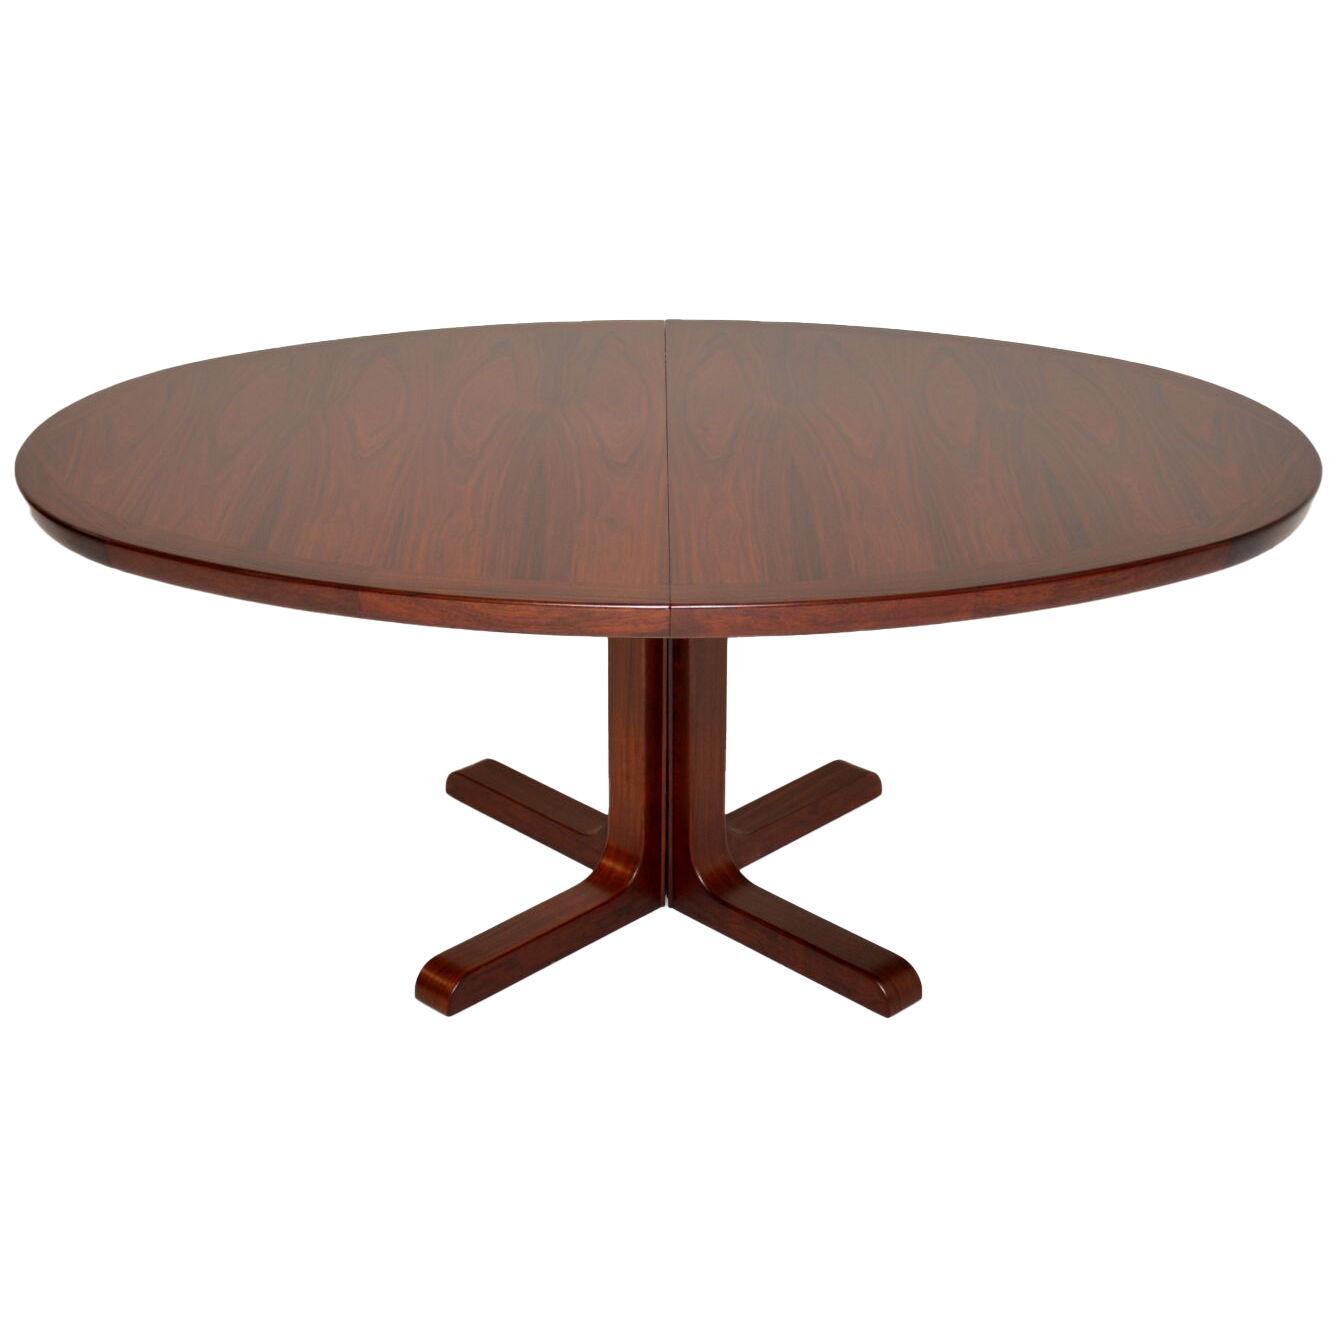 1960's Danish Vintage Rosewood Extending Dining Table